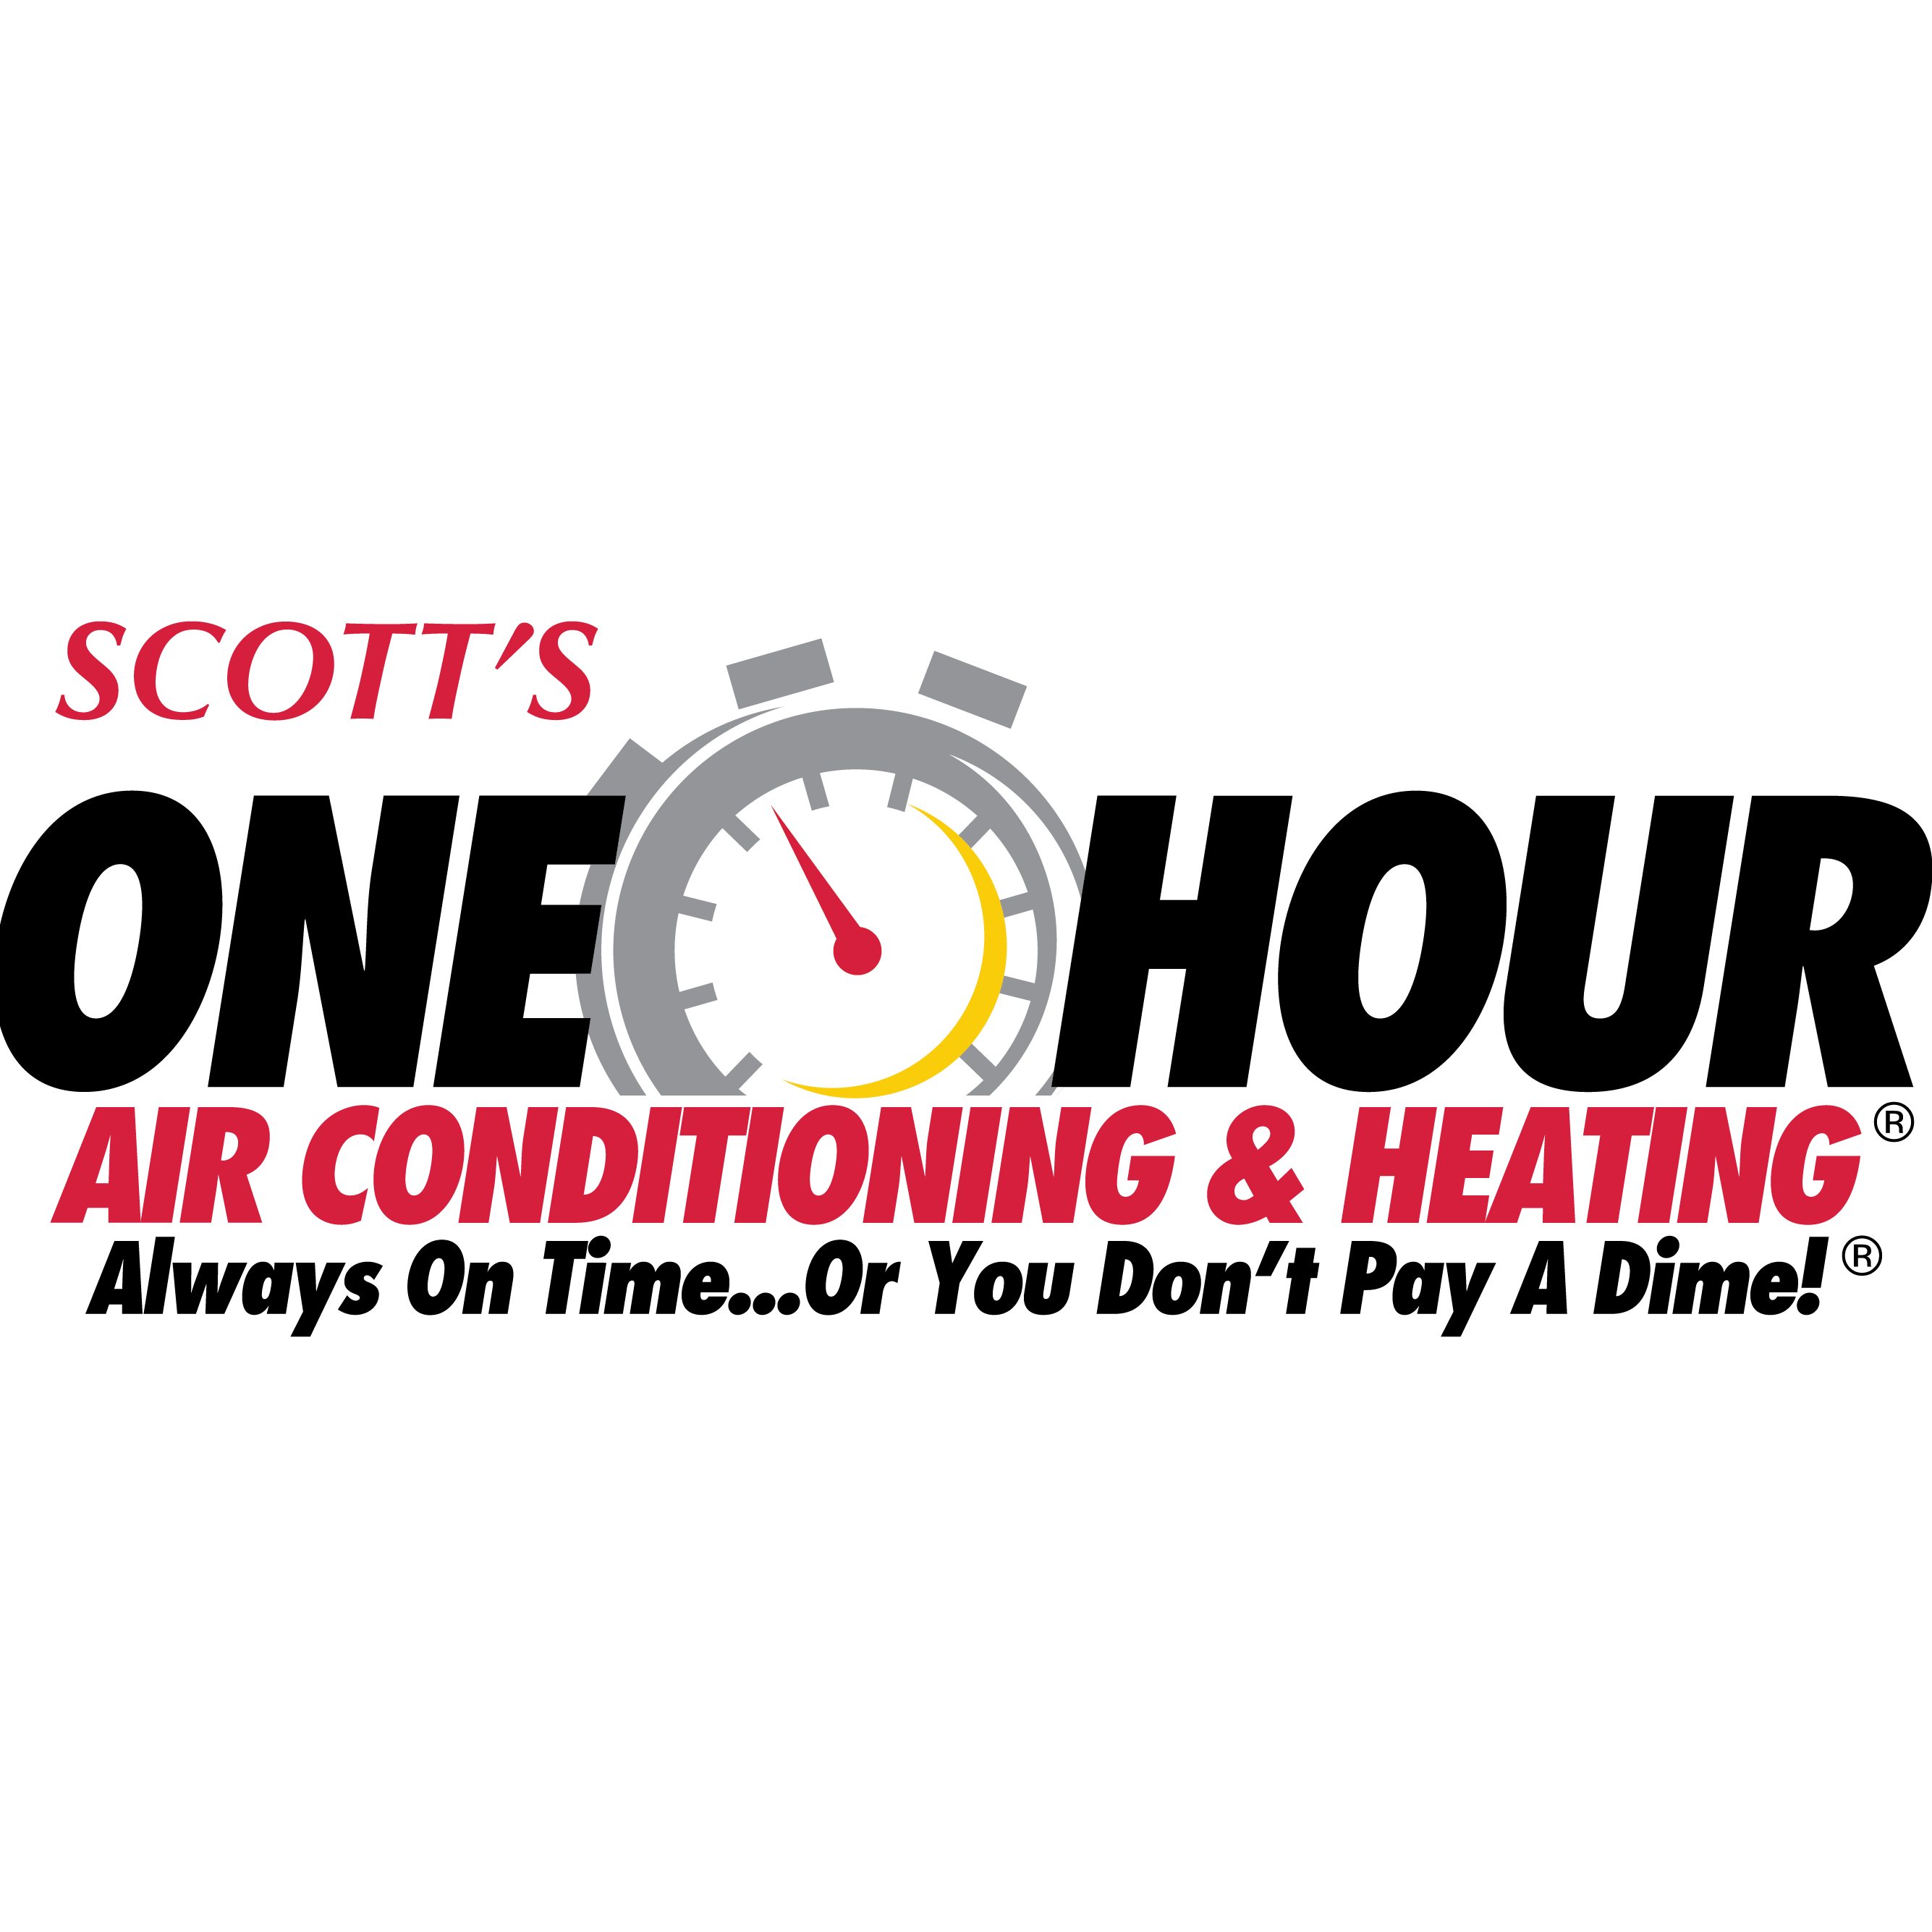 One Hour Air Conditioning & Heating Photo